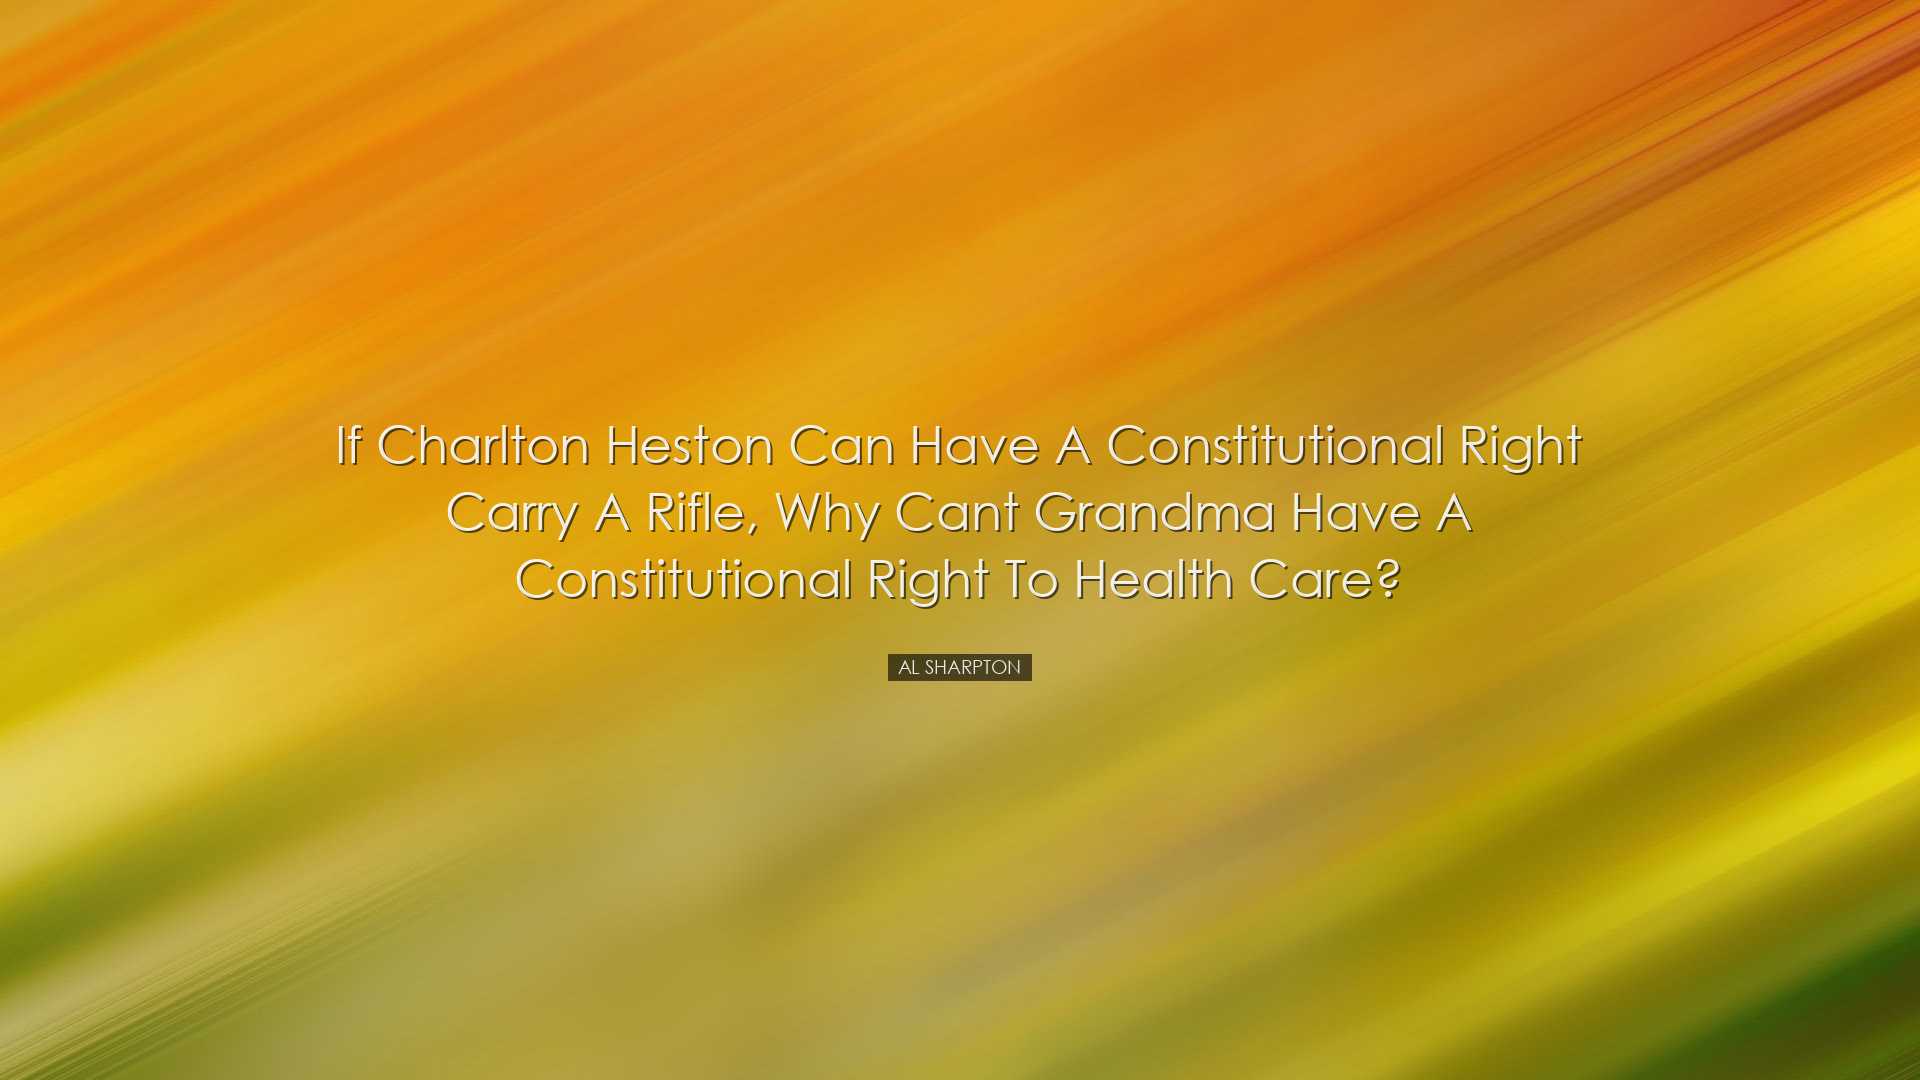 If Charlton Heston can have a constitutional right carry a rifle,